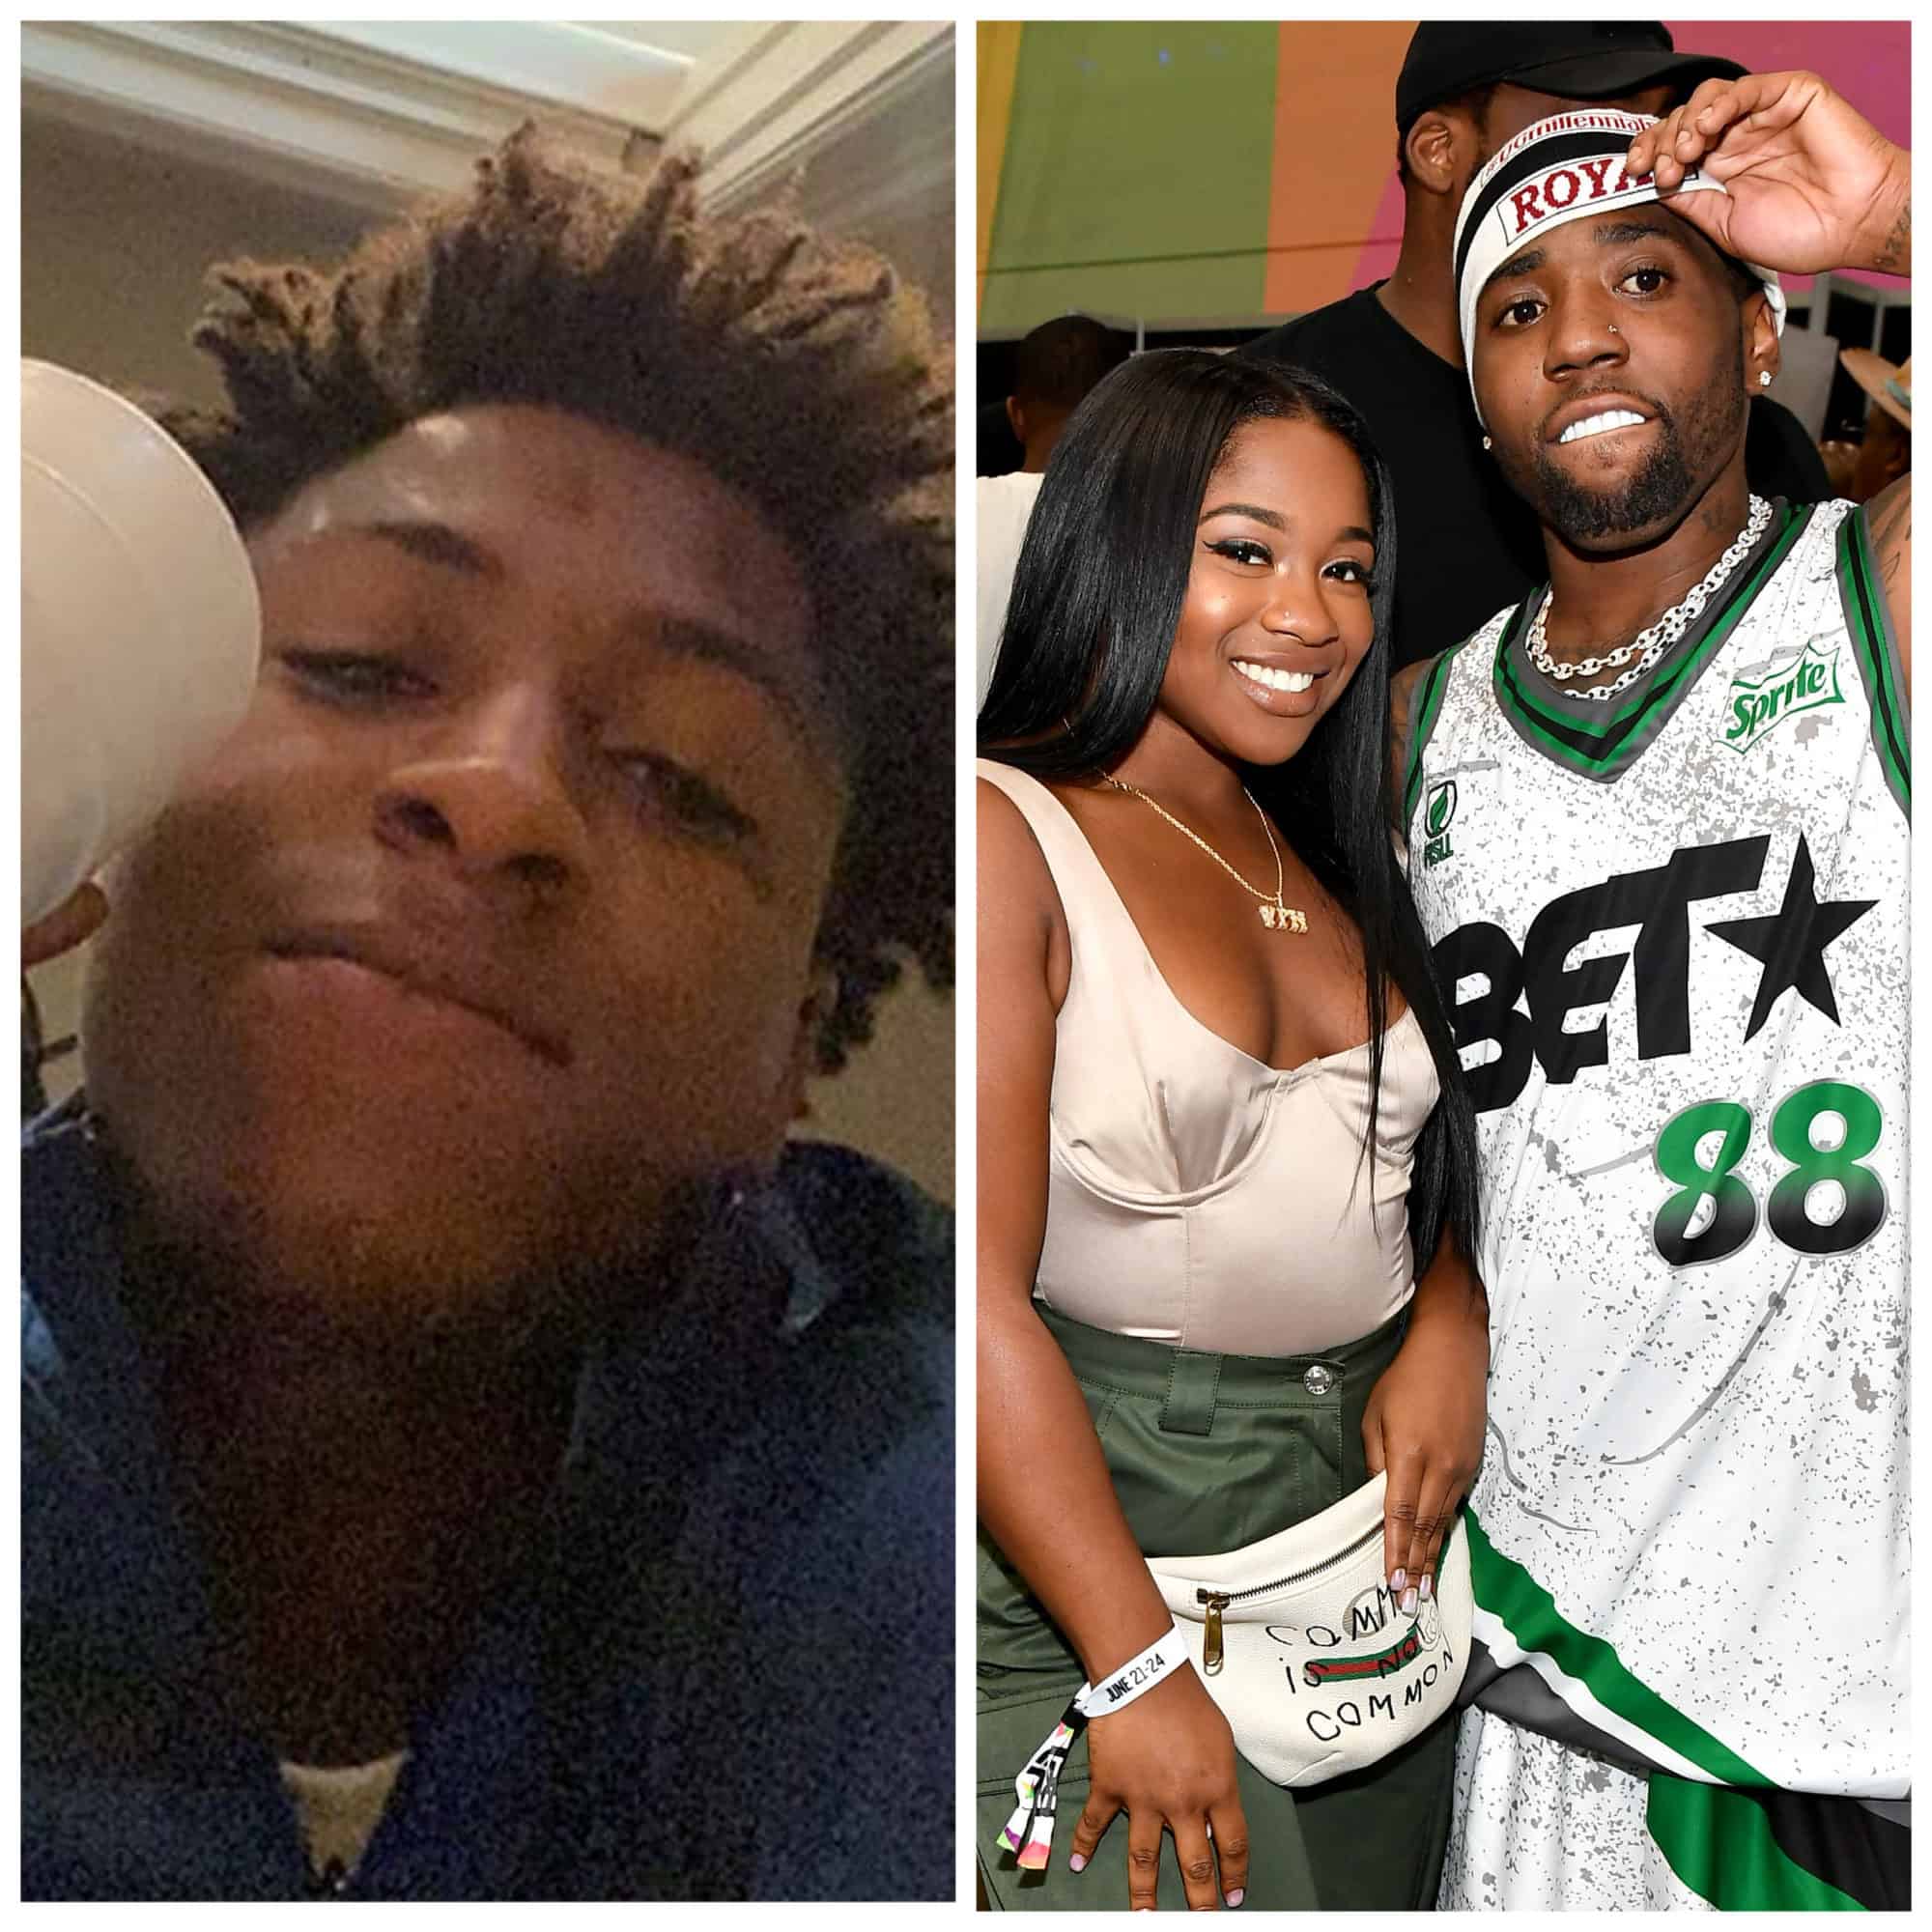 NBA YoungBoy Makes Mention Of Wanting To Have A Baby With Reginae Carter In New Son-YFN Lucci Calls Him A B***h In Response